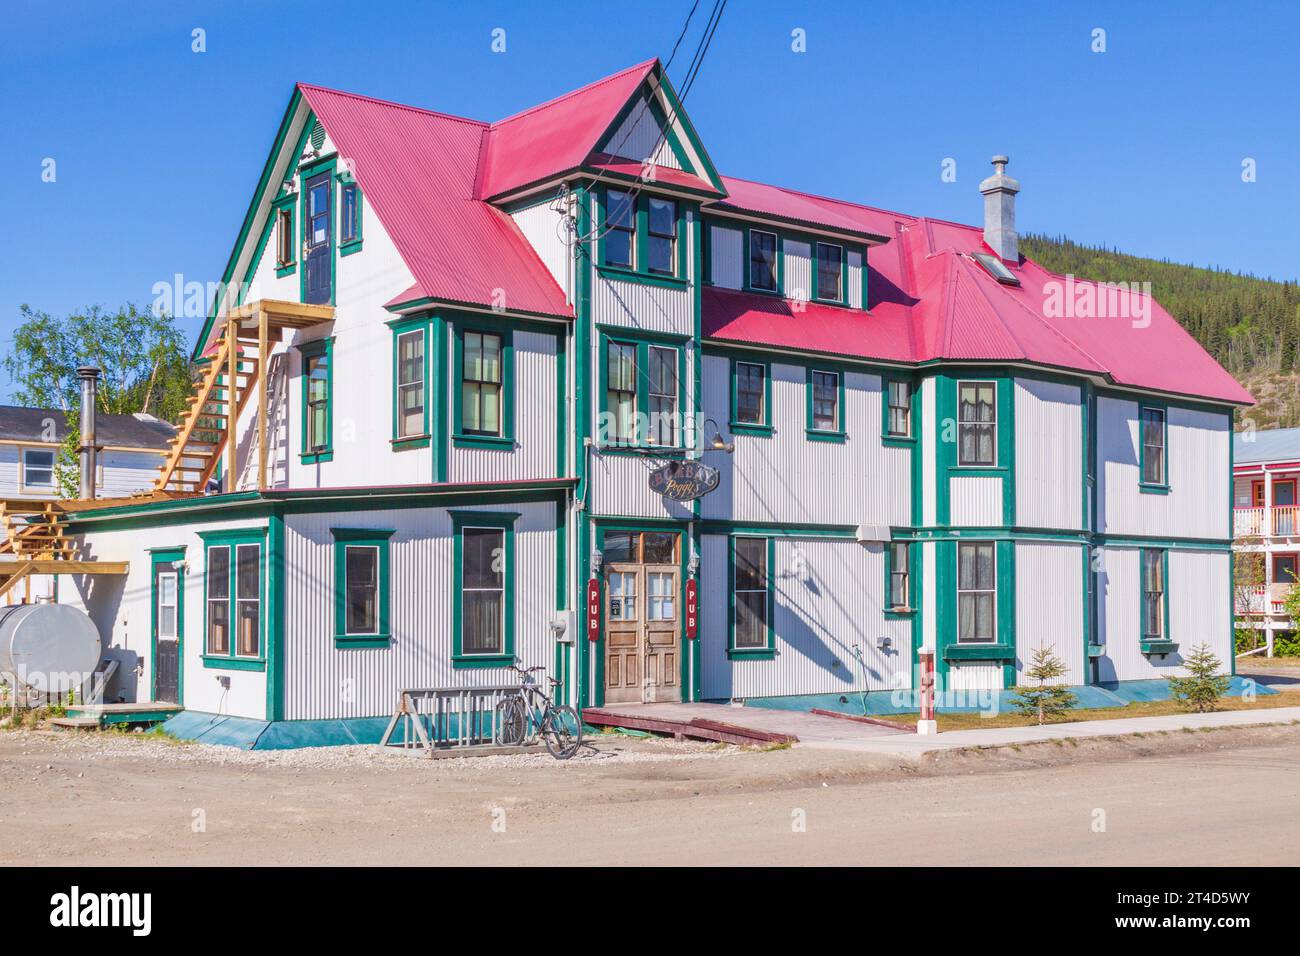 Dawson City in the Yukon Territory, Canada, has a subartic climate and a year round population of about 1900. Stock Photo